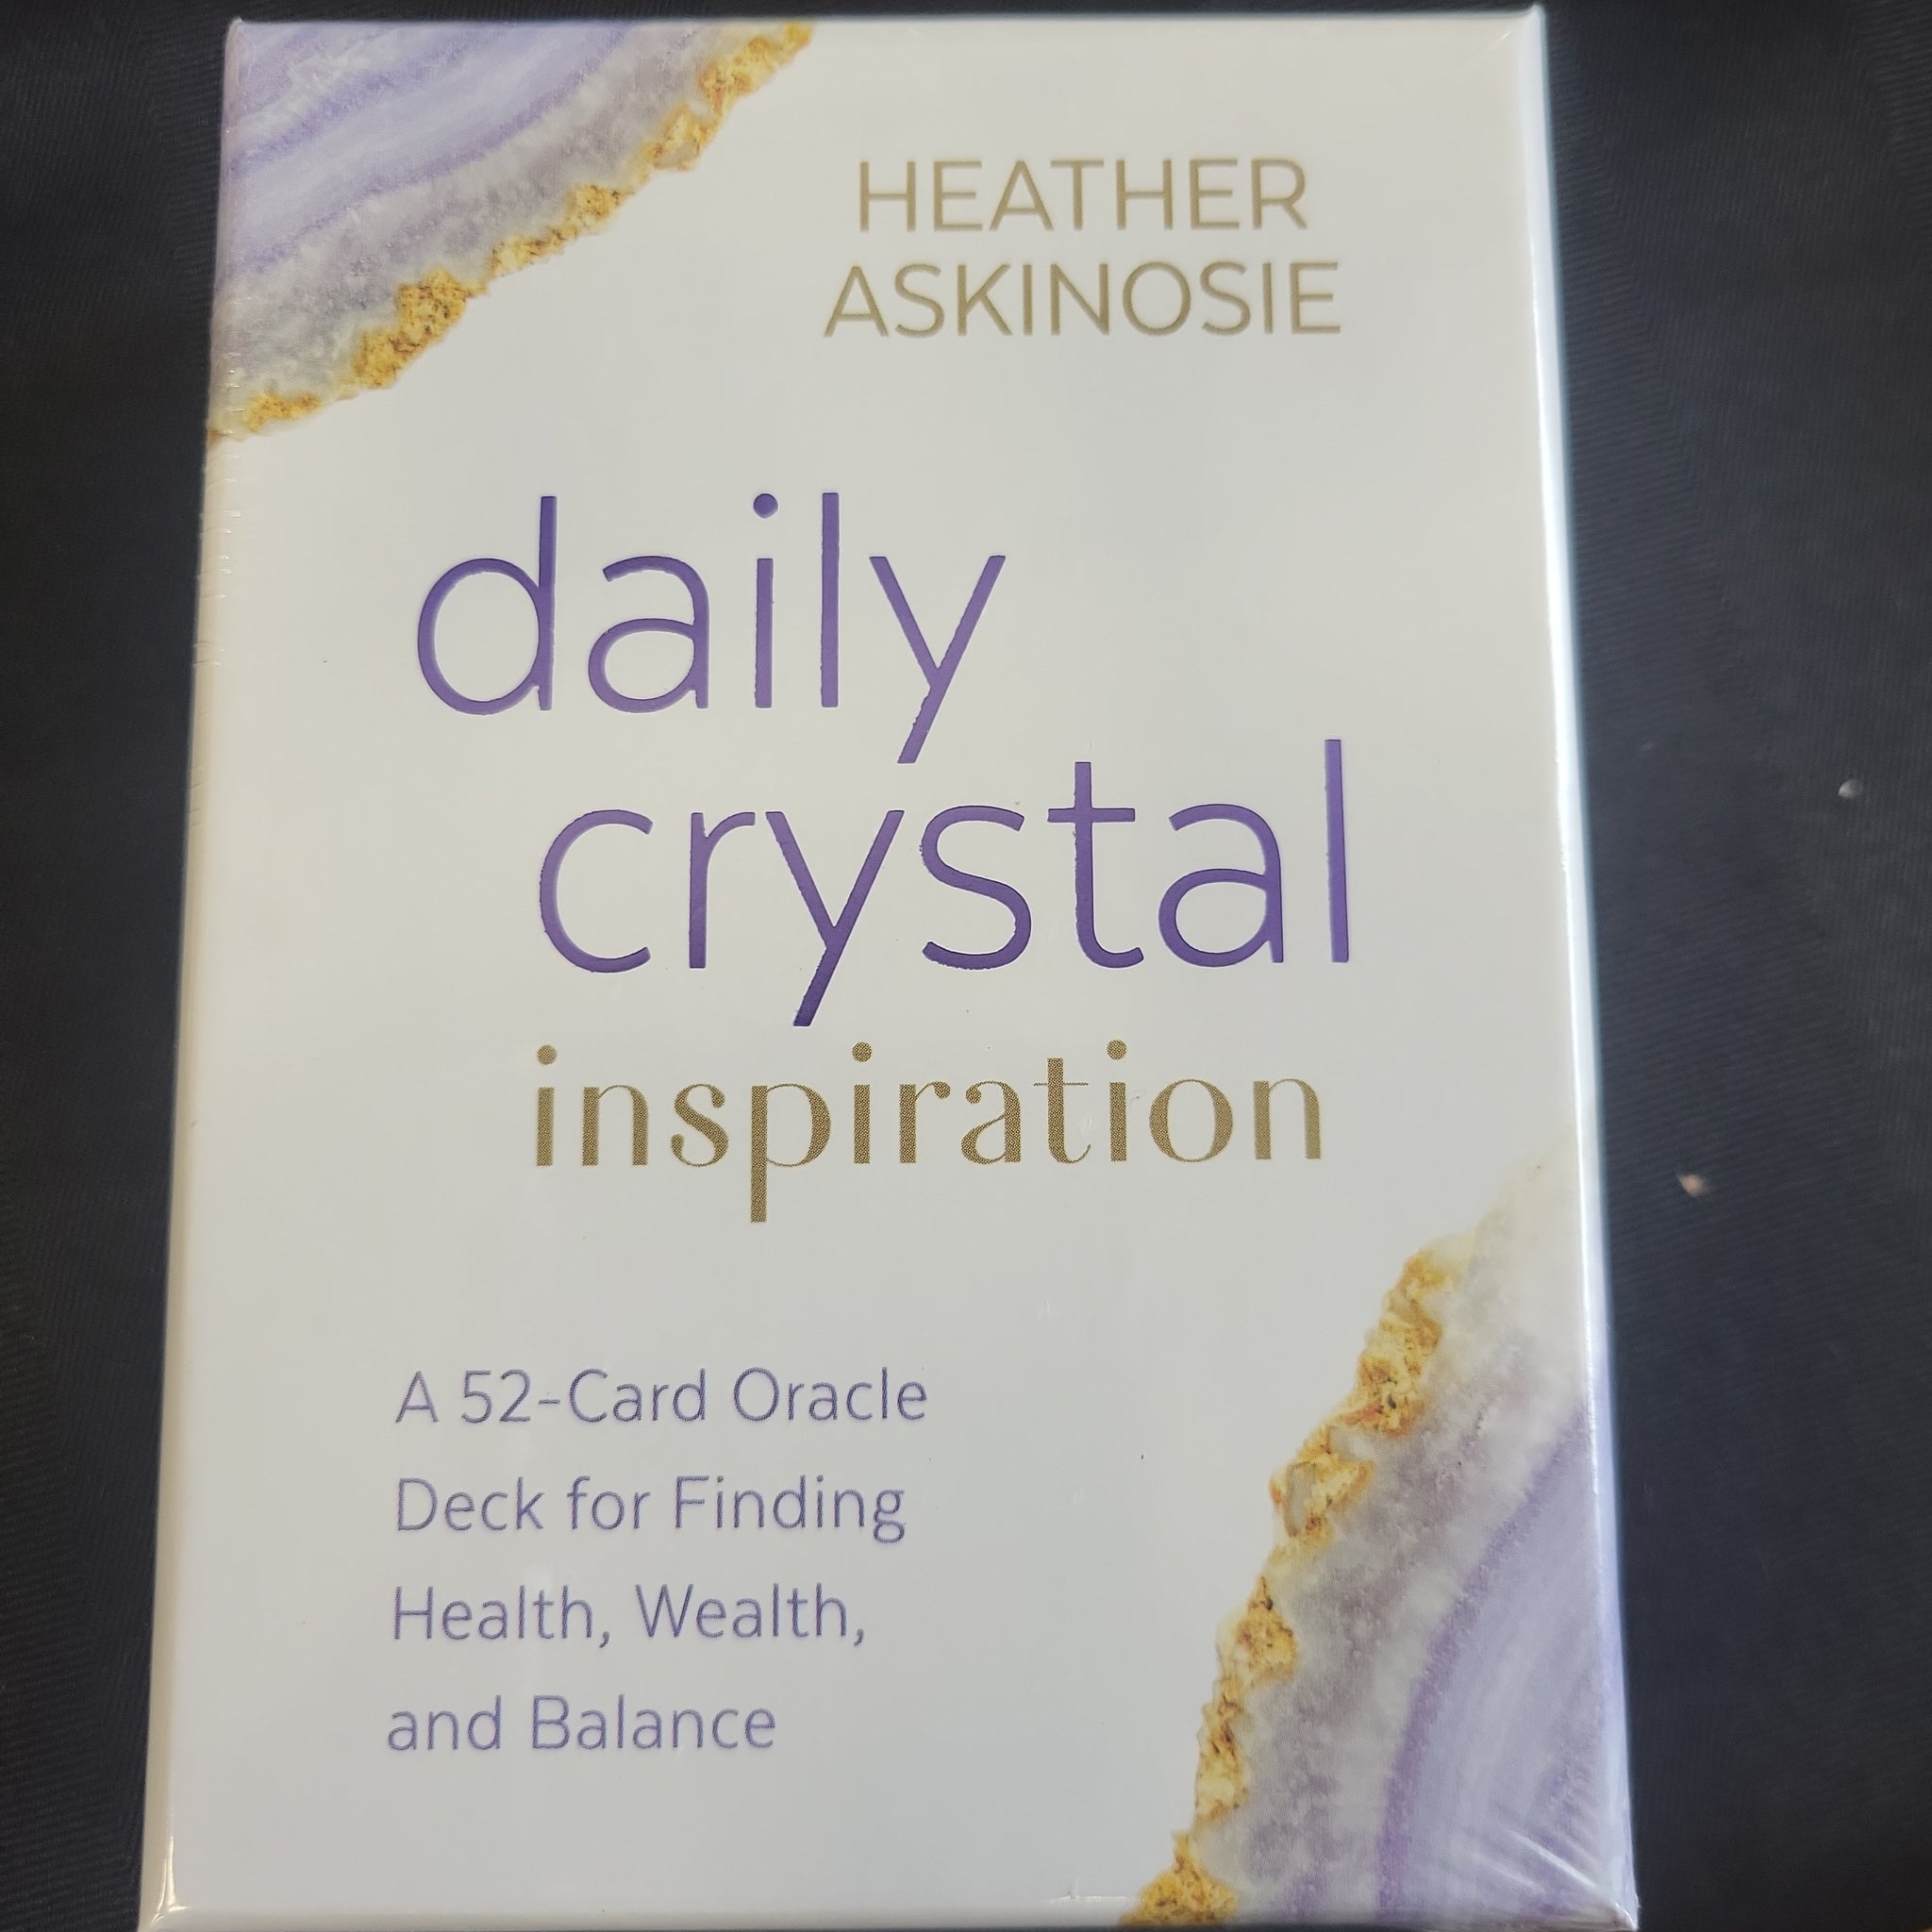 Daily Crystal Inspiration